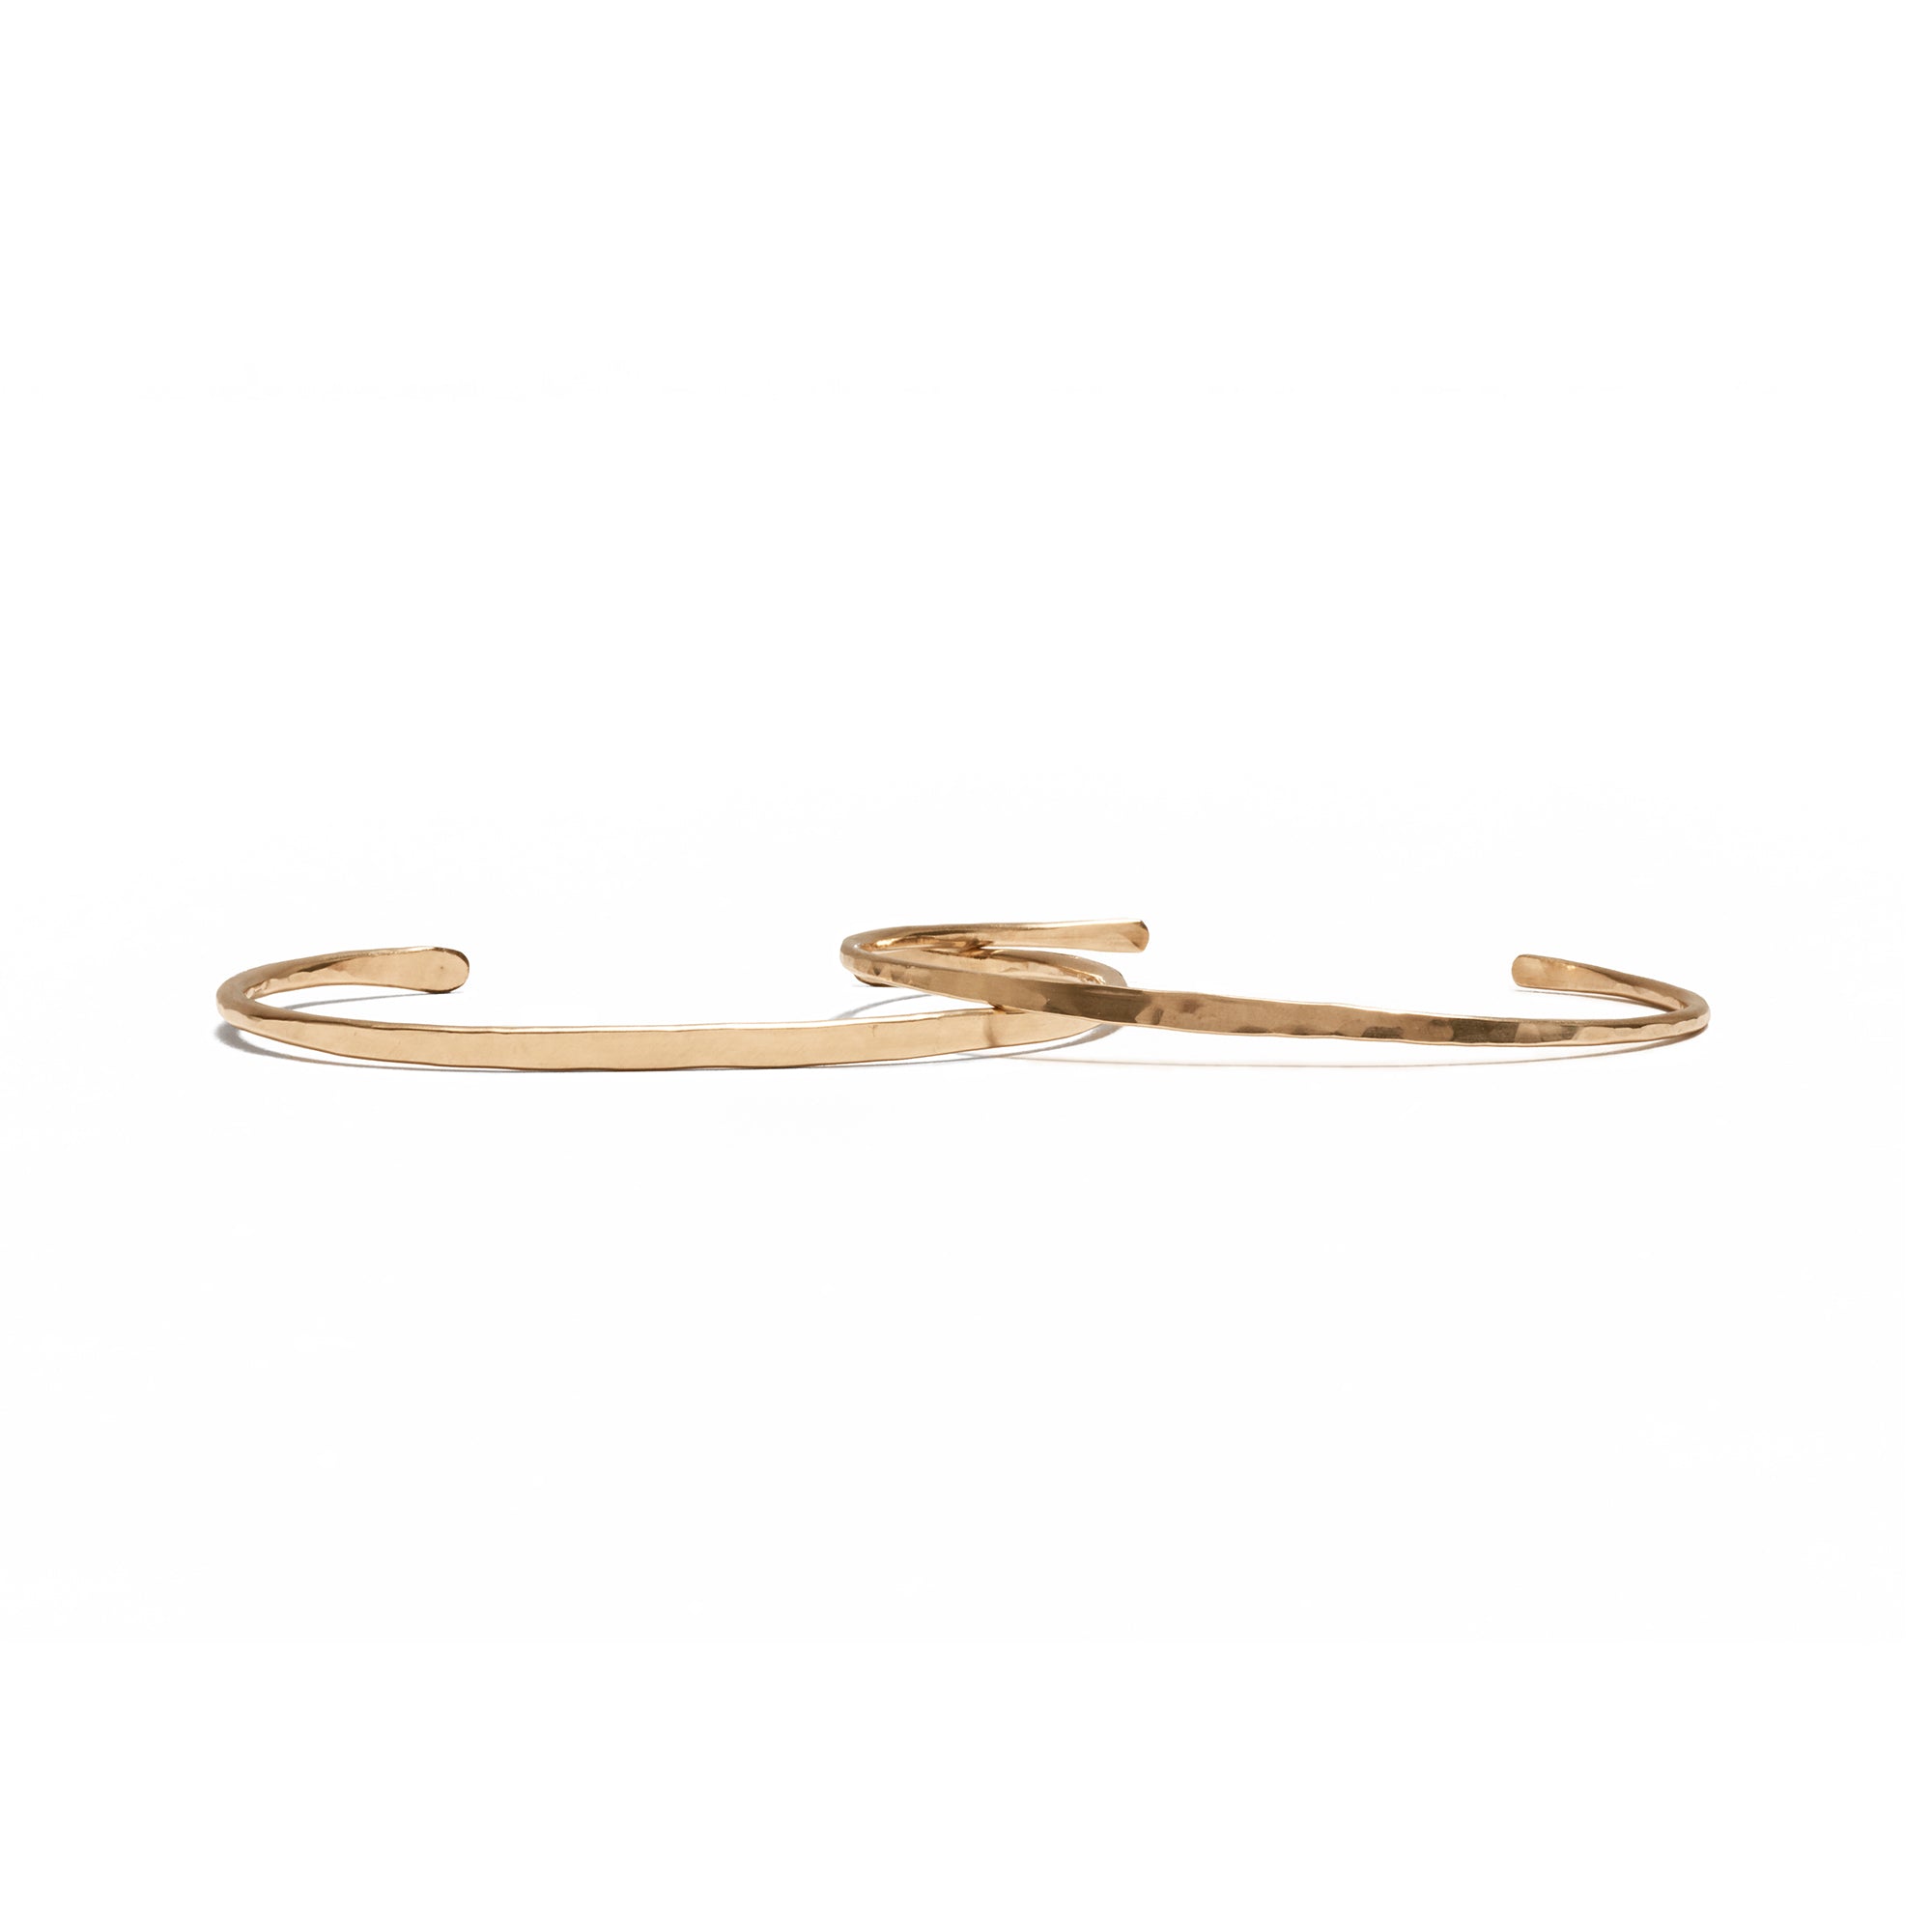 Sleek and sophisticated, the Thin Simple Forged Cuff is the perfect addition to a minimalist collection.